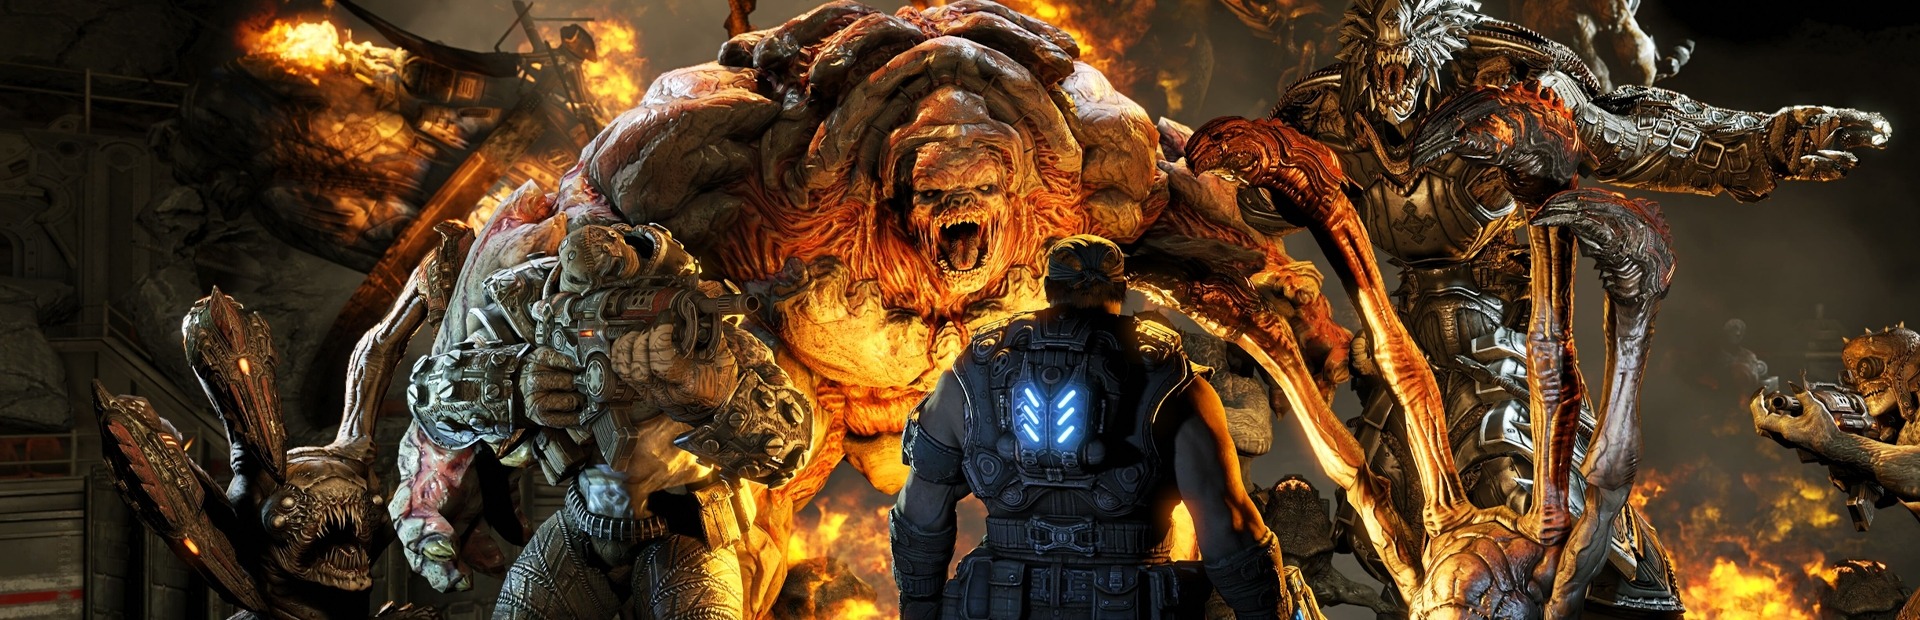 Gears of War Remastered Collection